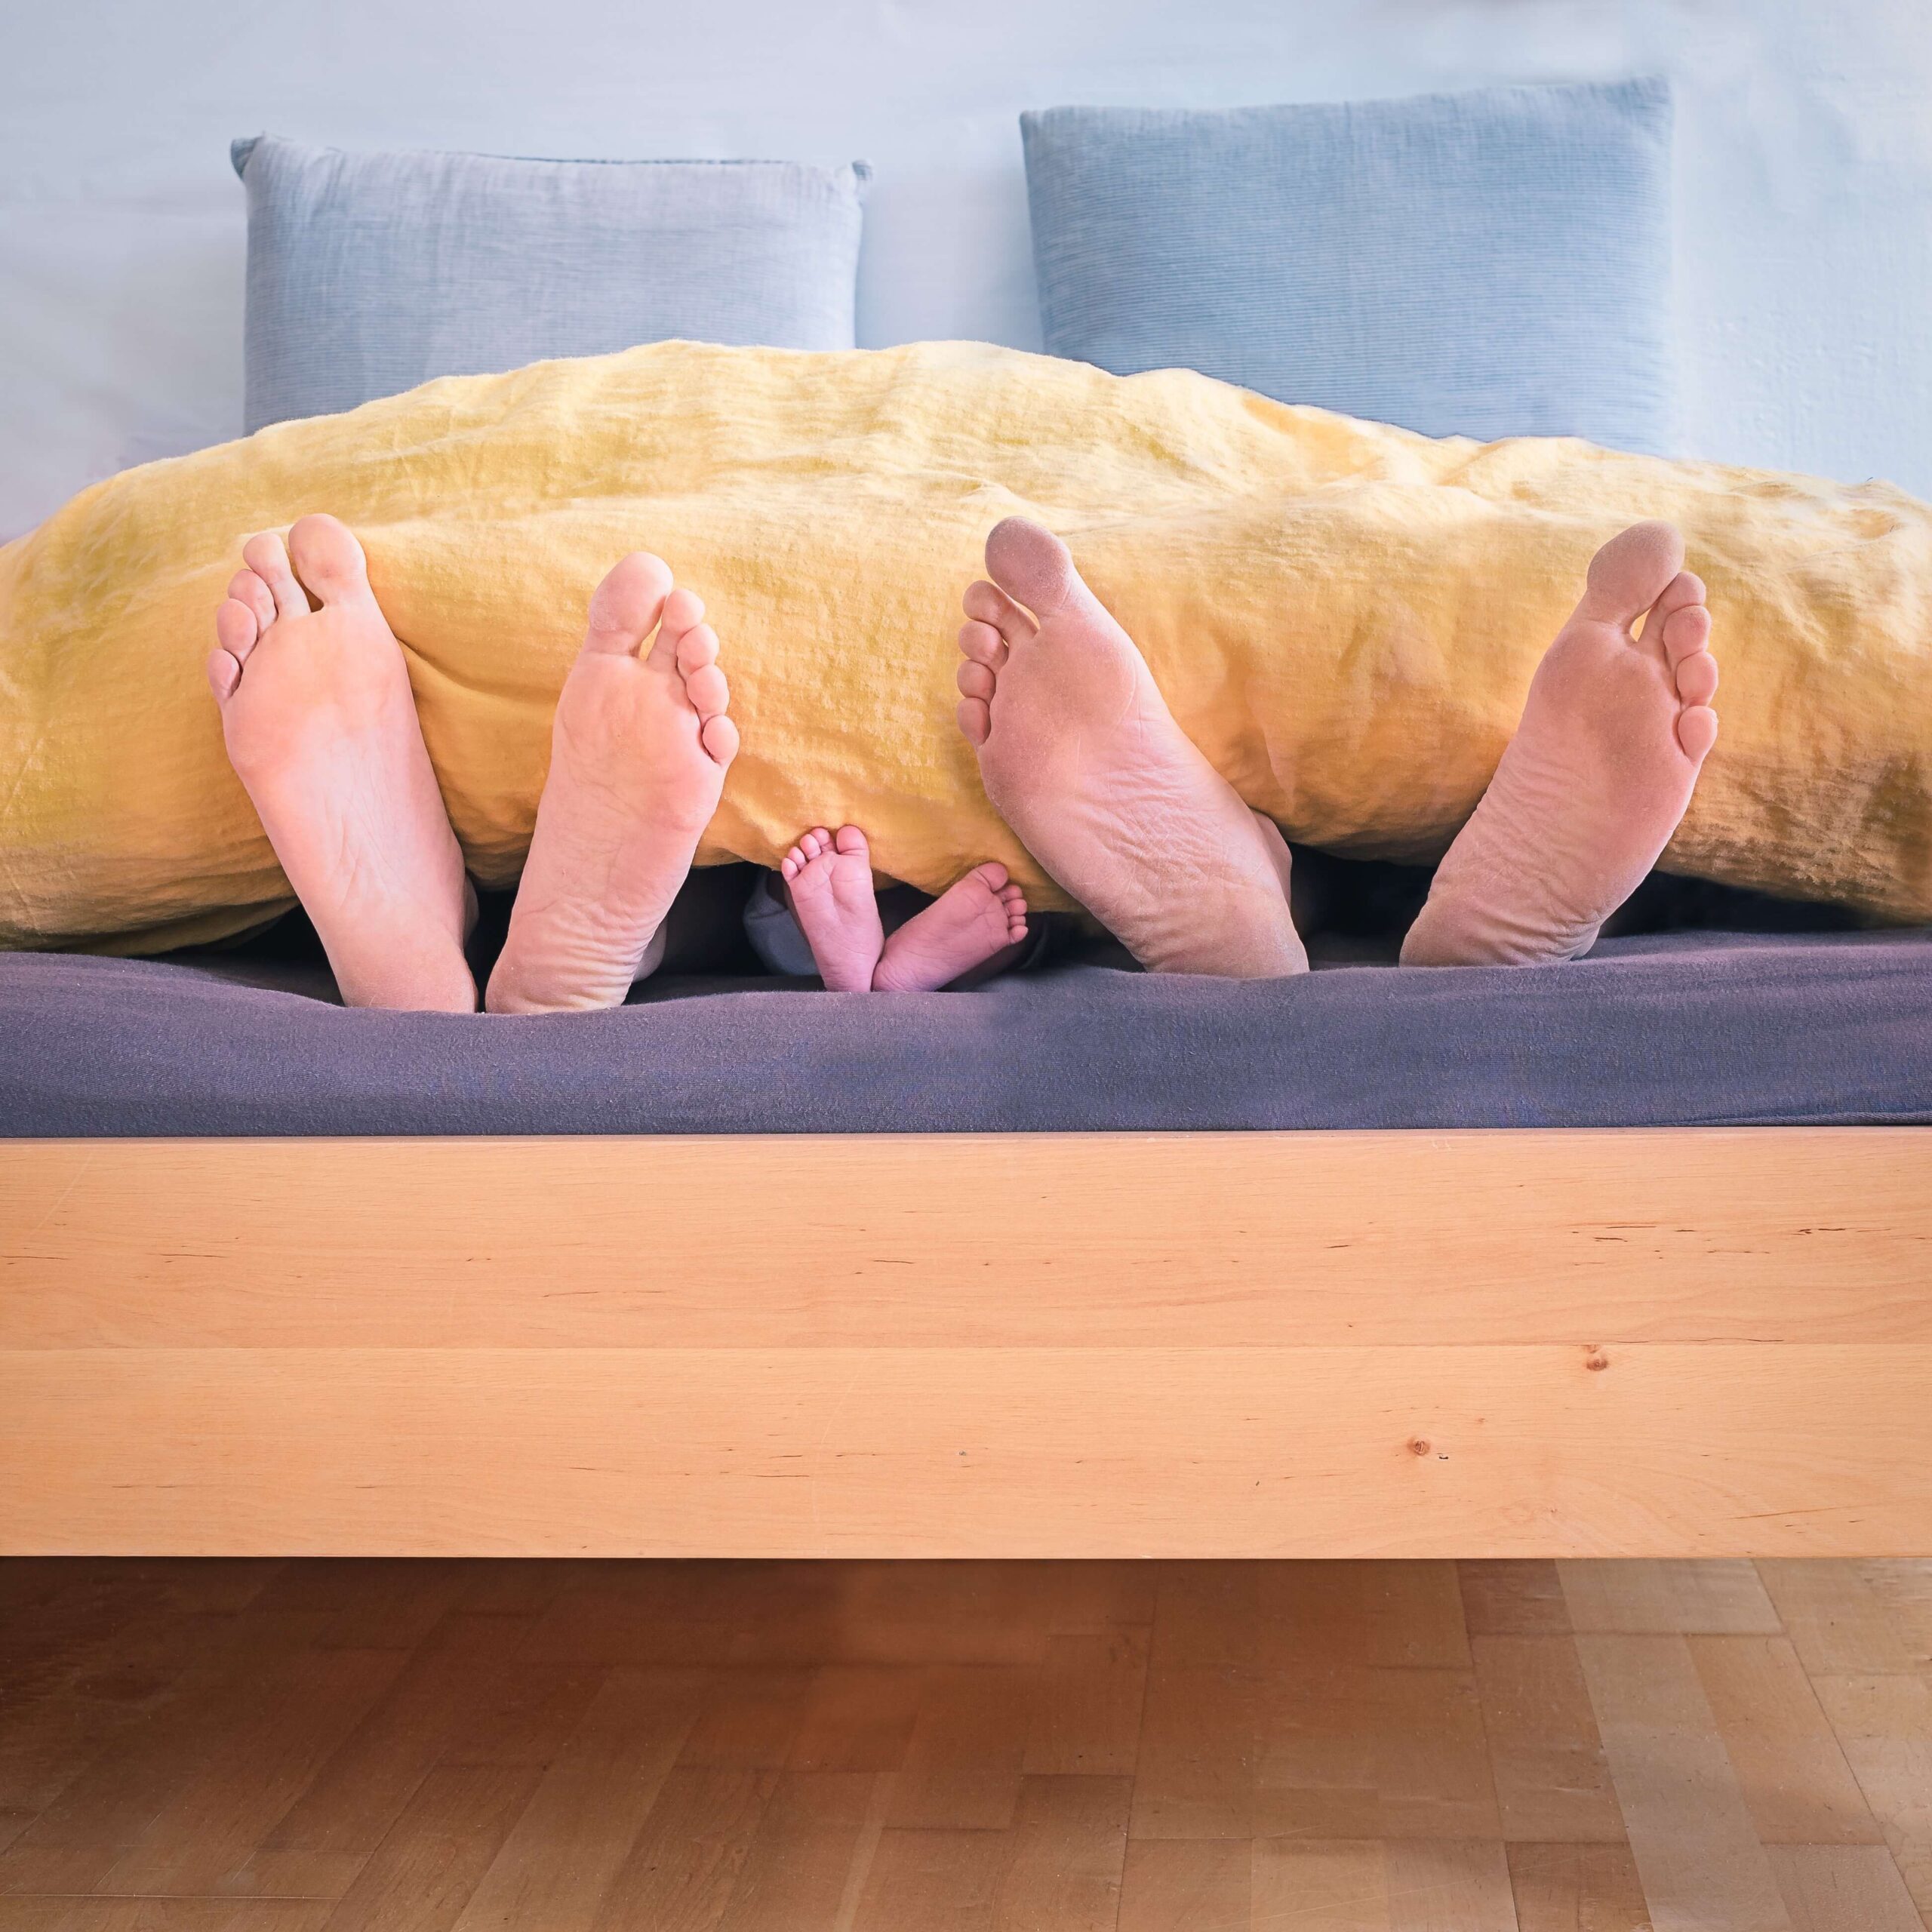 family lying on bed showing their foot